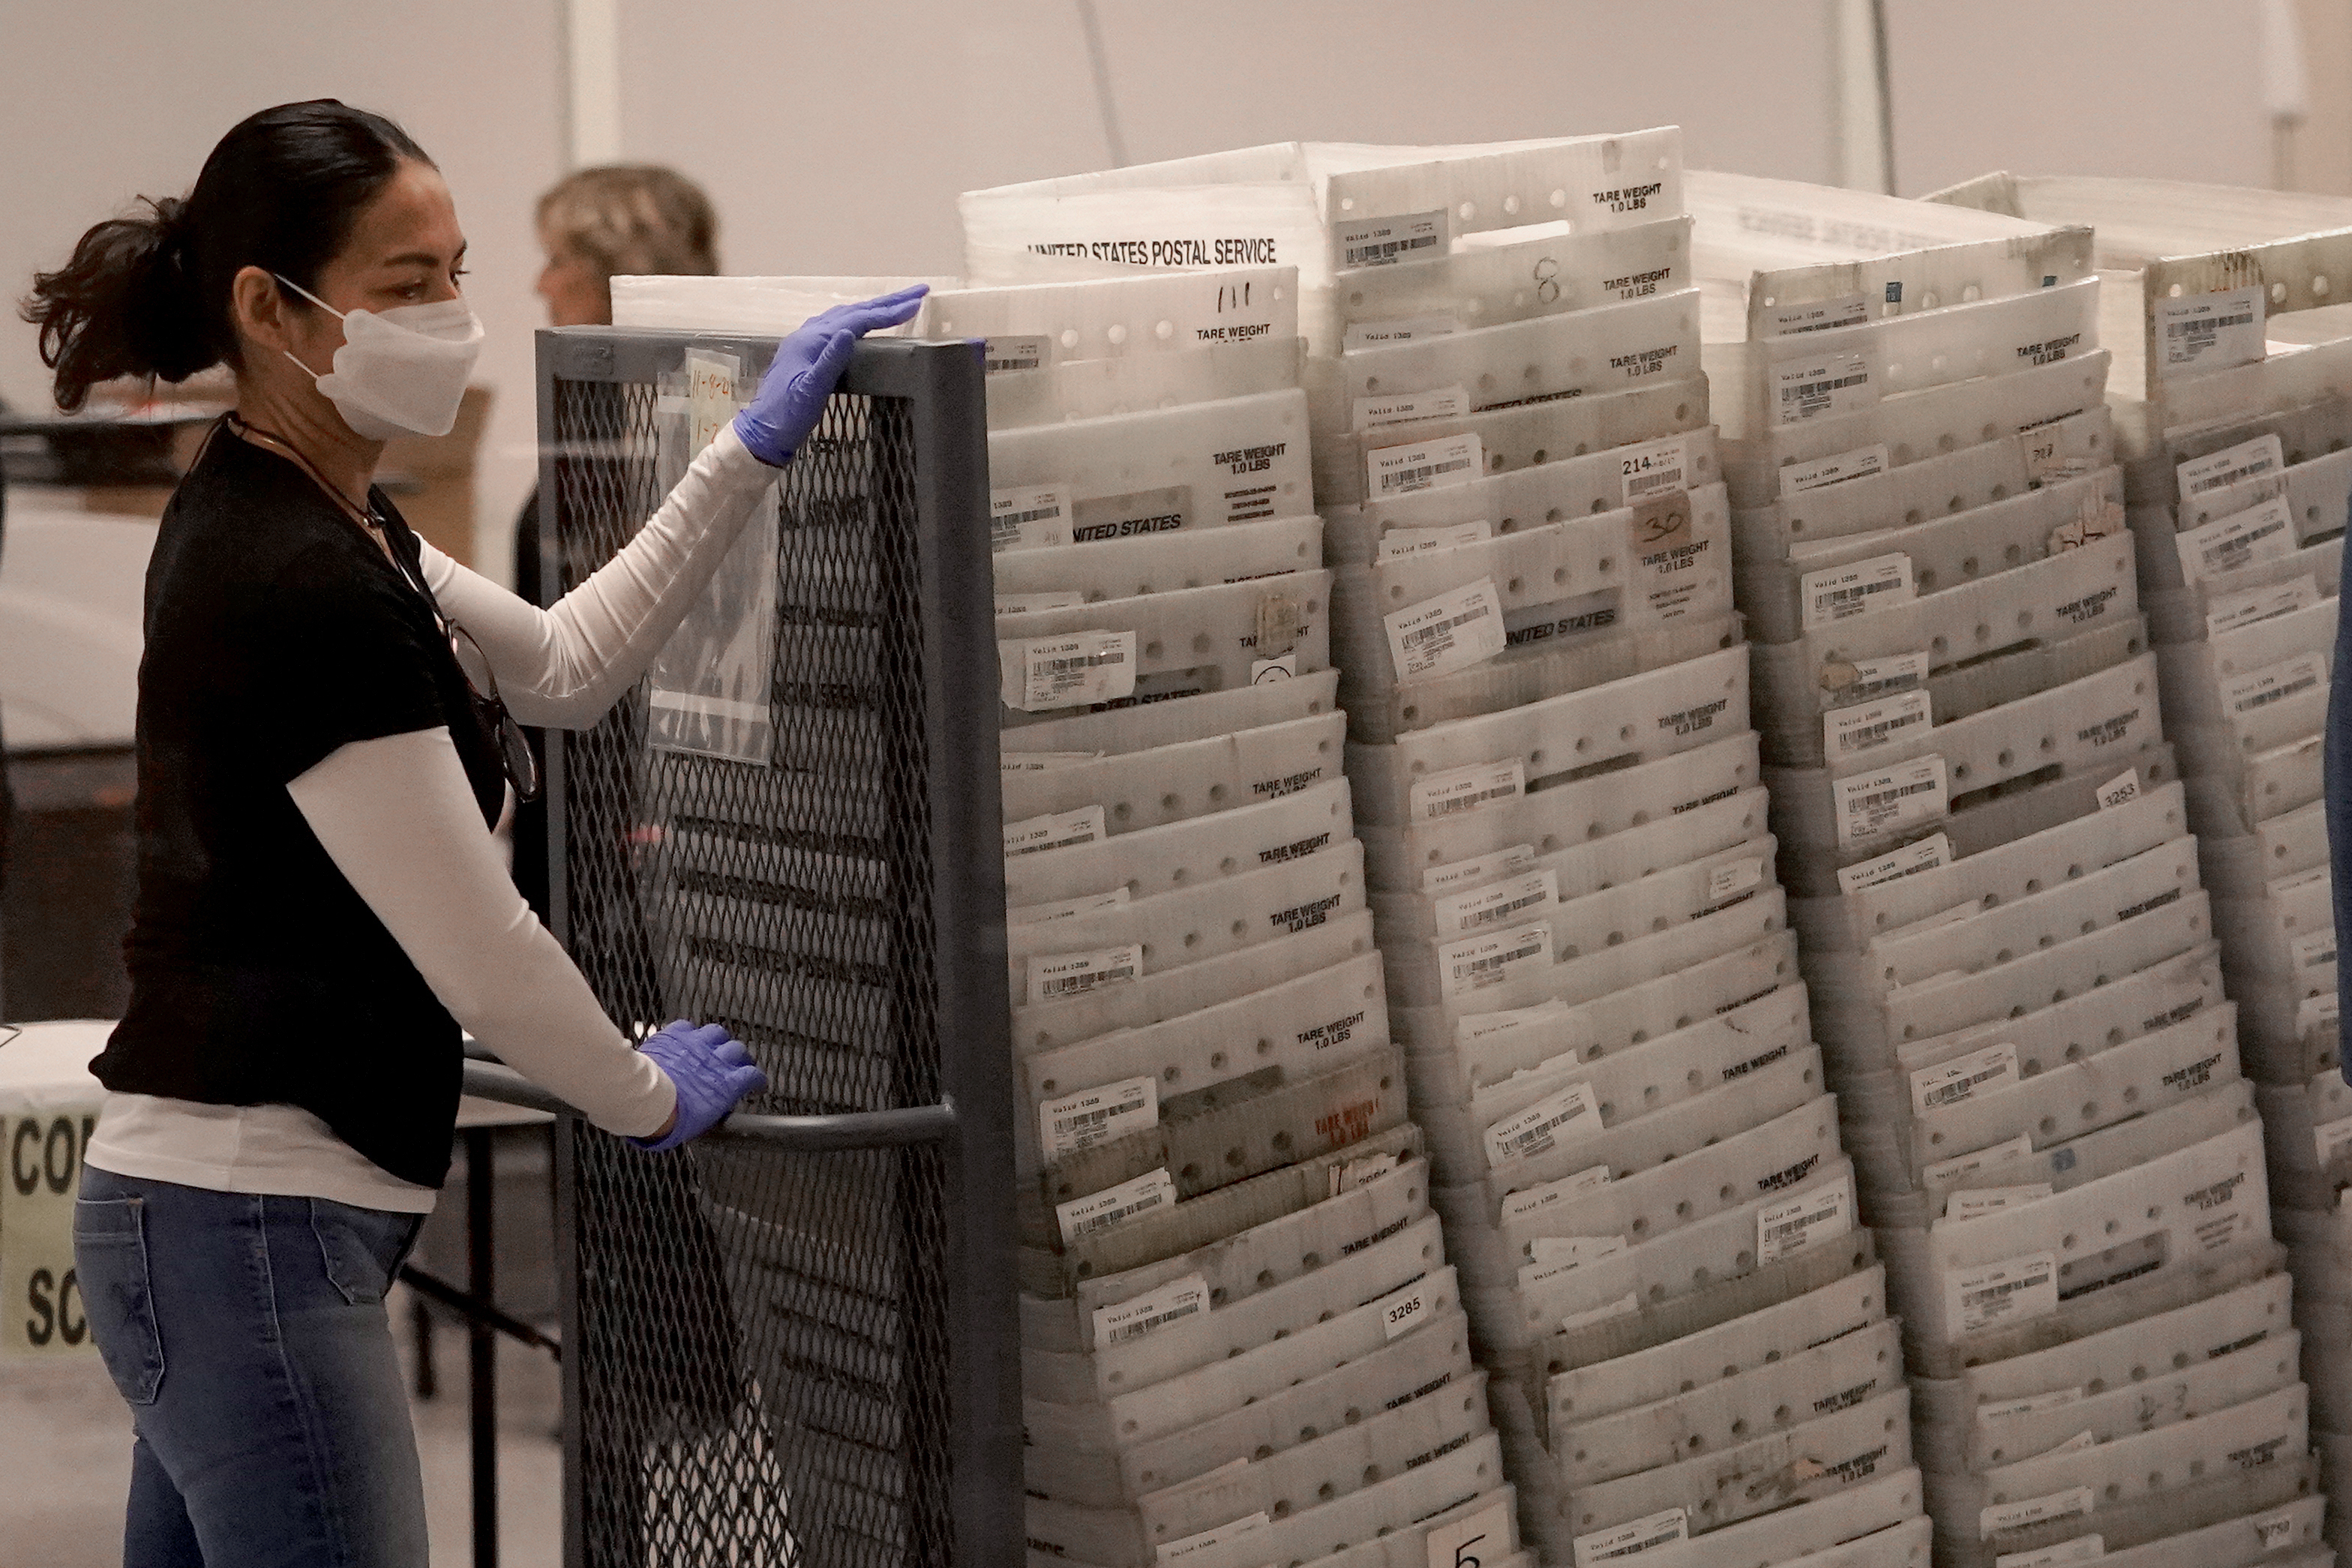 An election worker arrives with ballots to be tabulated inside the Maricopa County Recorder's Office today in Phoenix.